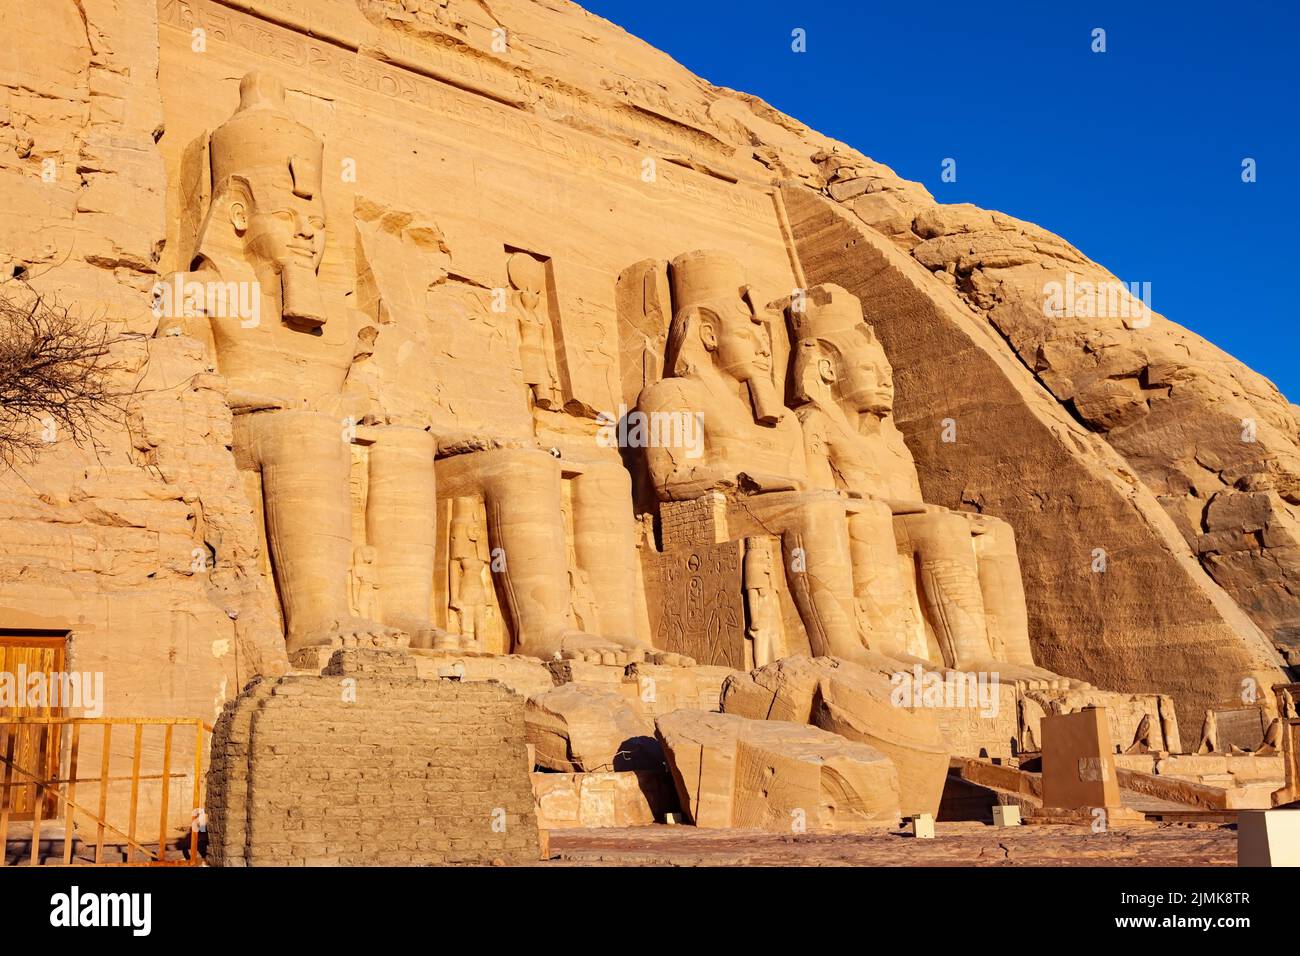 Seated statue of Ramses II in front of The Great Temple of Ramses II at Abu Simbel Village. Stock Photo